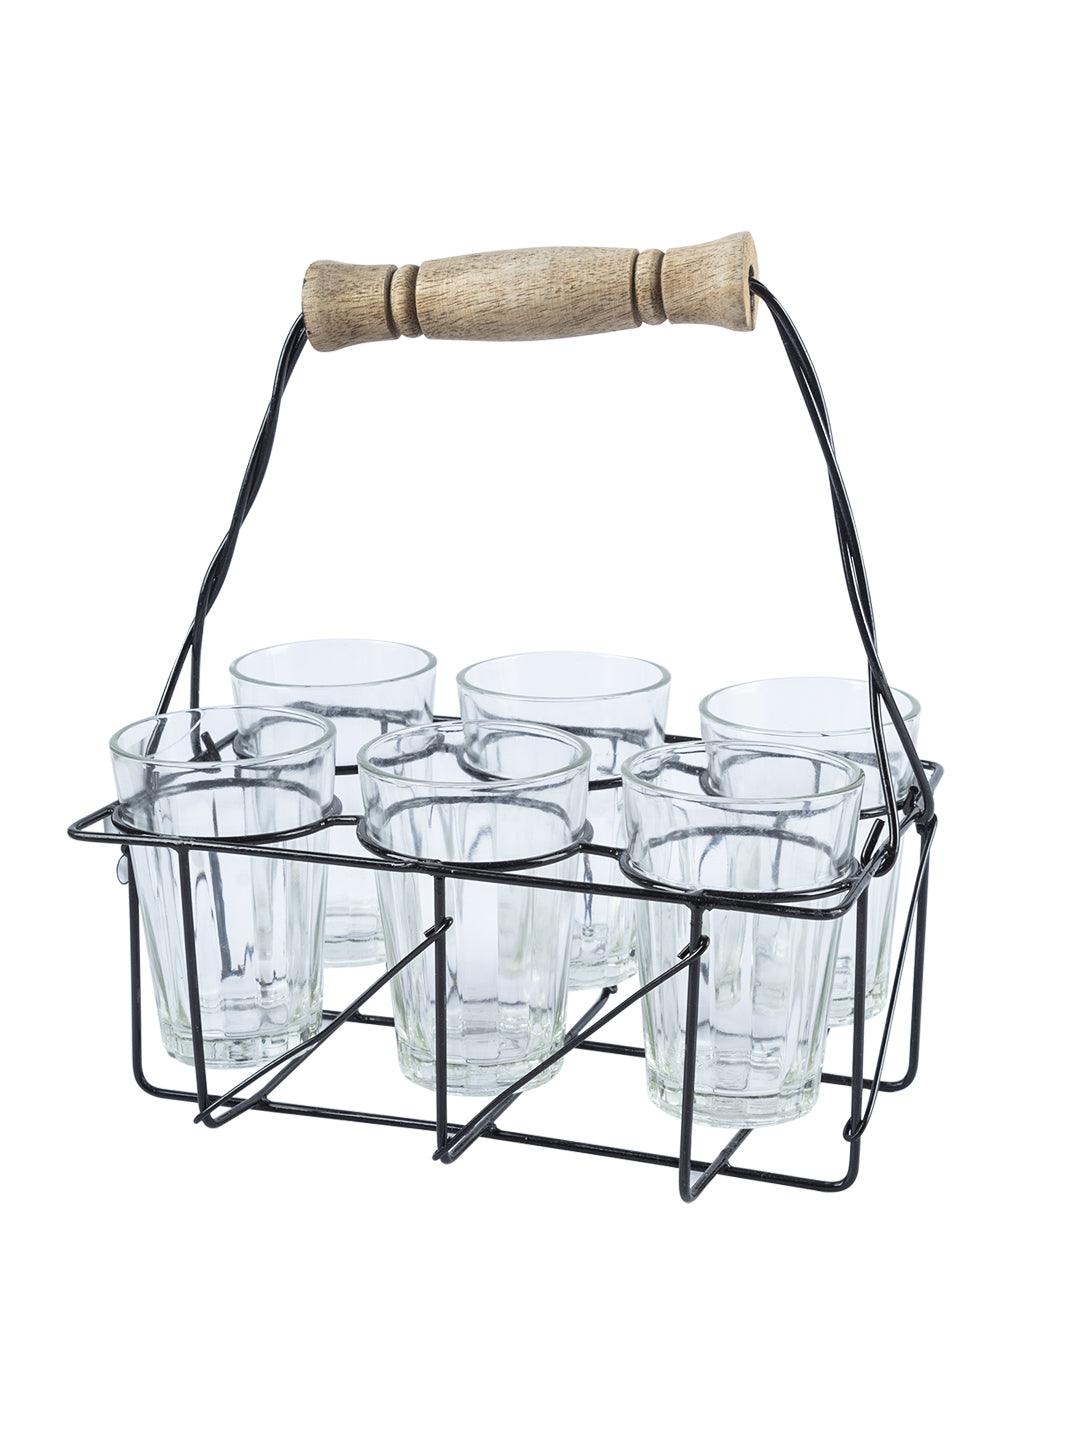 Black Tea Stand With Glasses